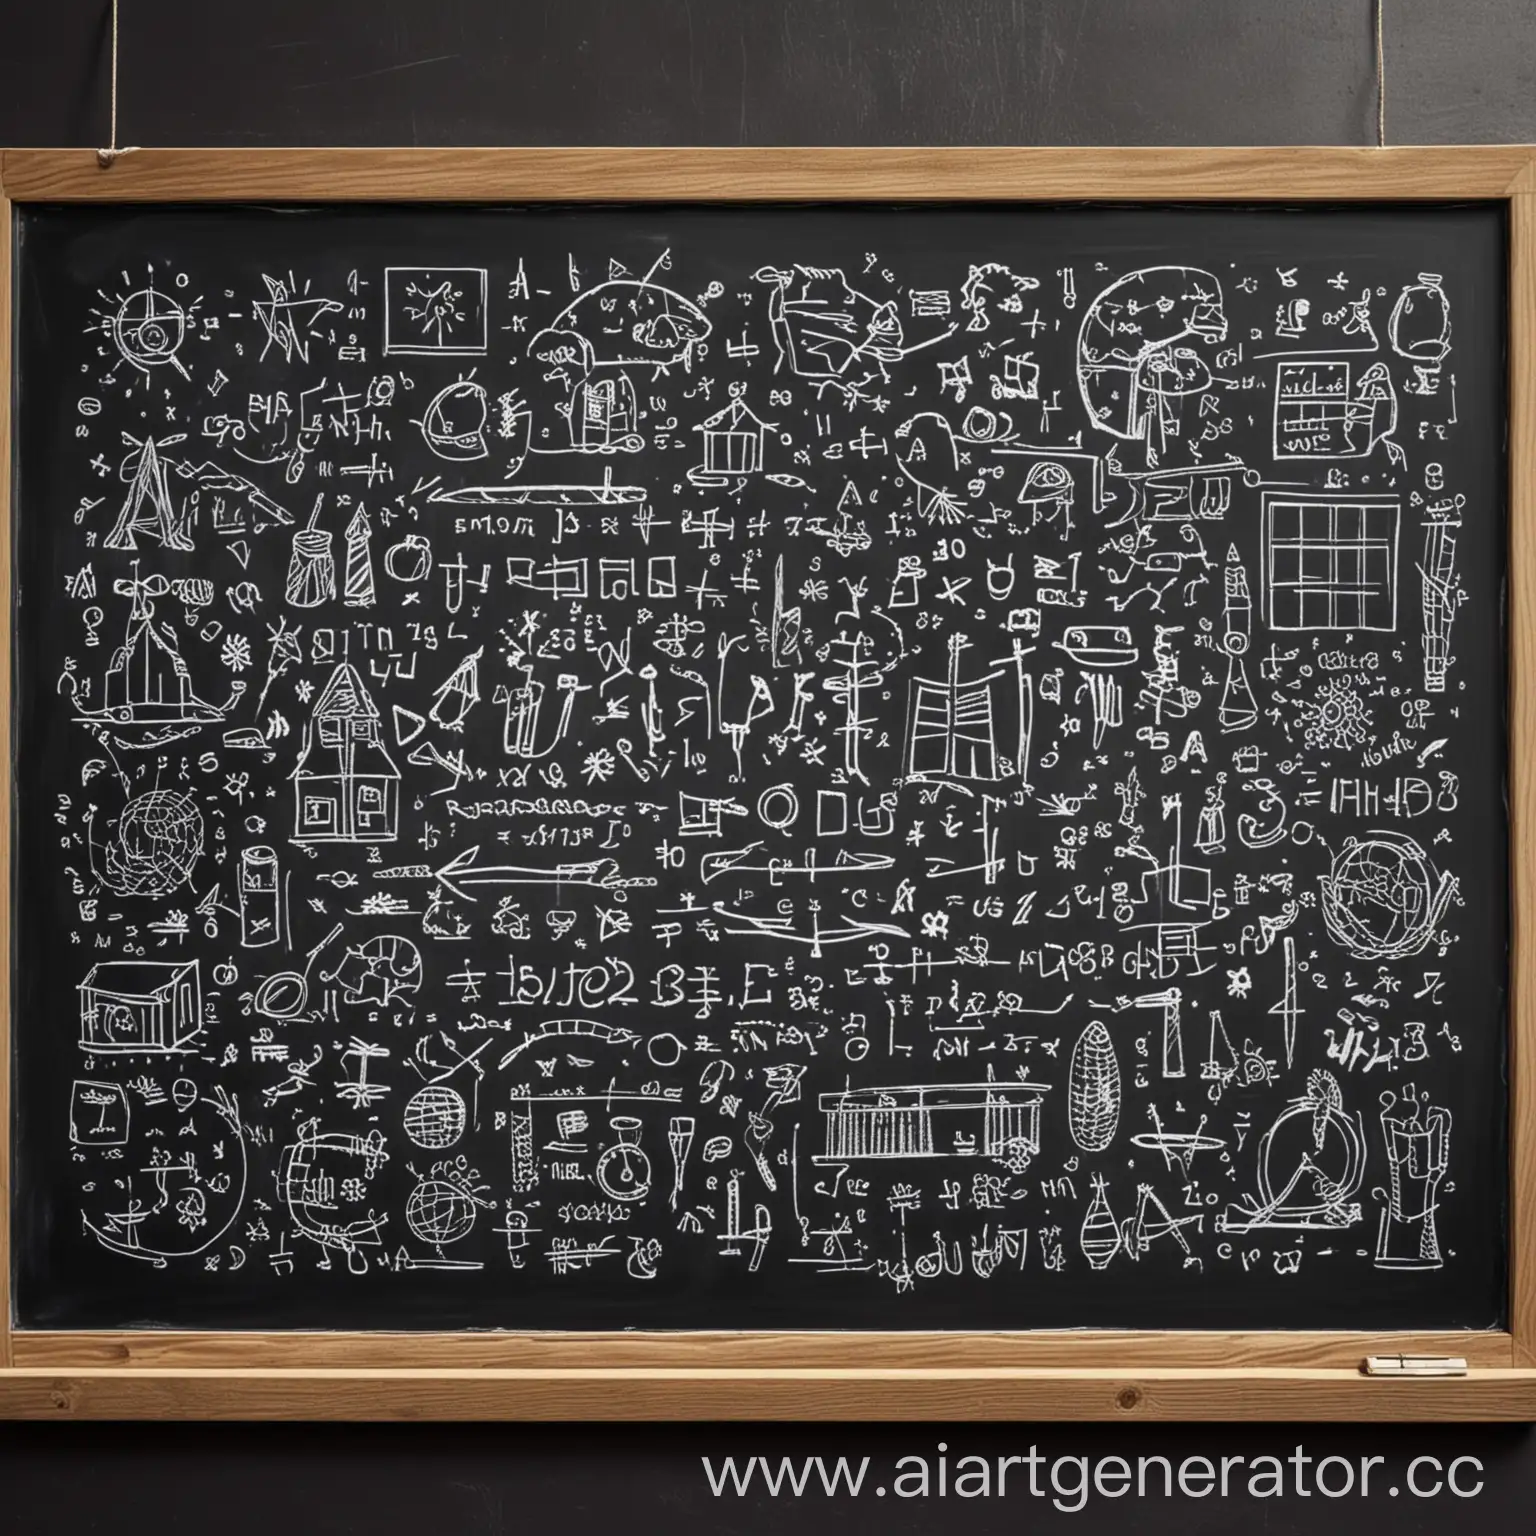 Chalkboard-Mathematics-Illustrations-of-Mathematical-Concepts-in-Light-Chalk-Drawings